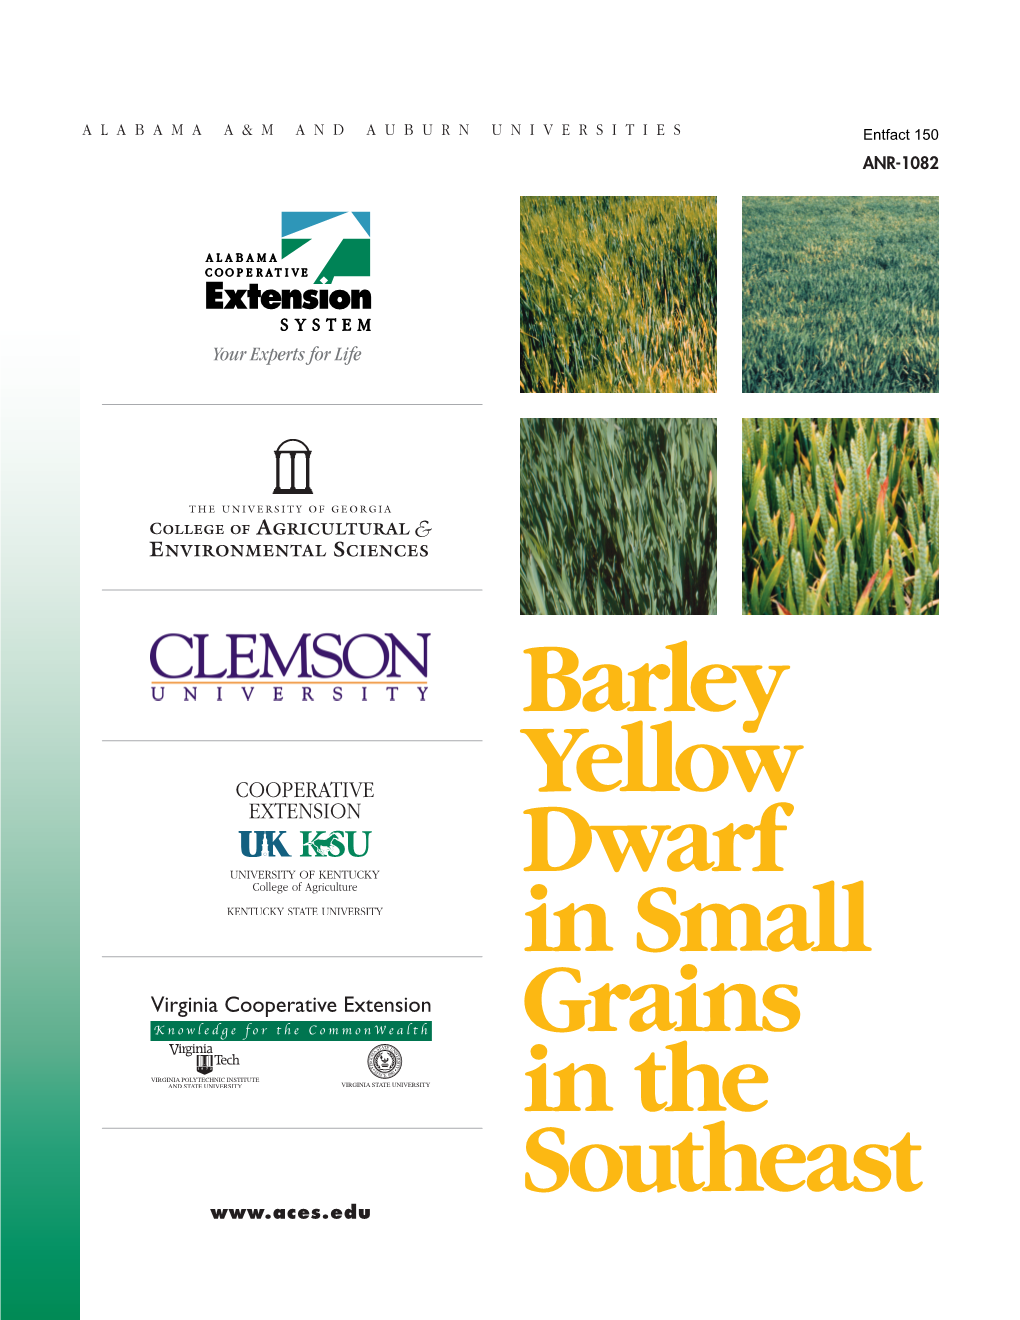 Barley Yellow Dwarf in Small Grains in the Southeast (PDF)